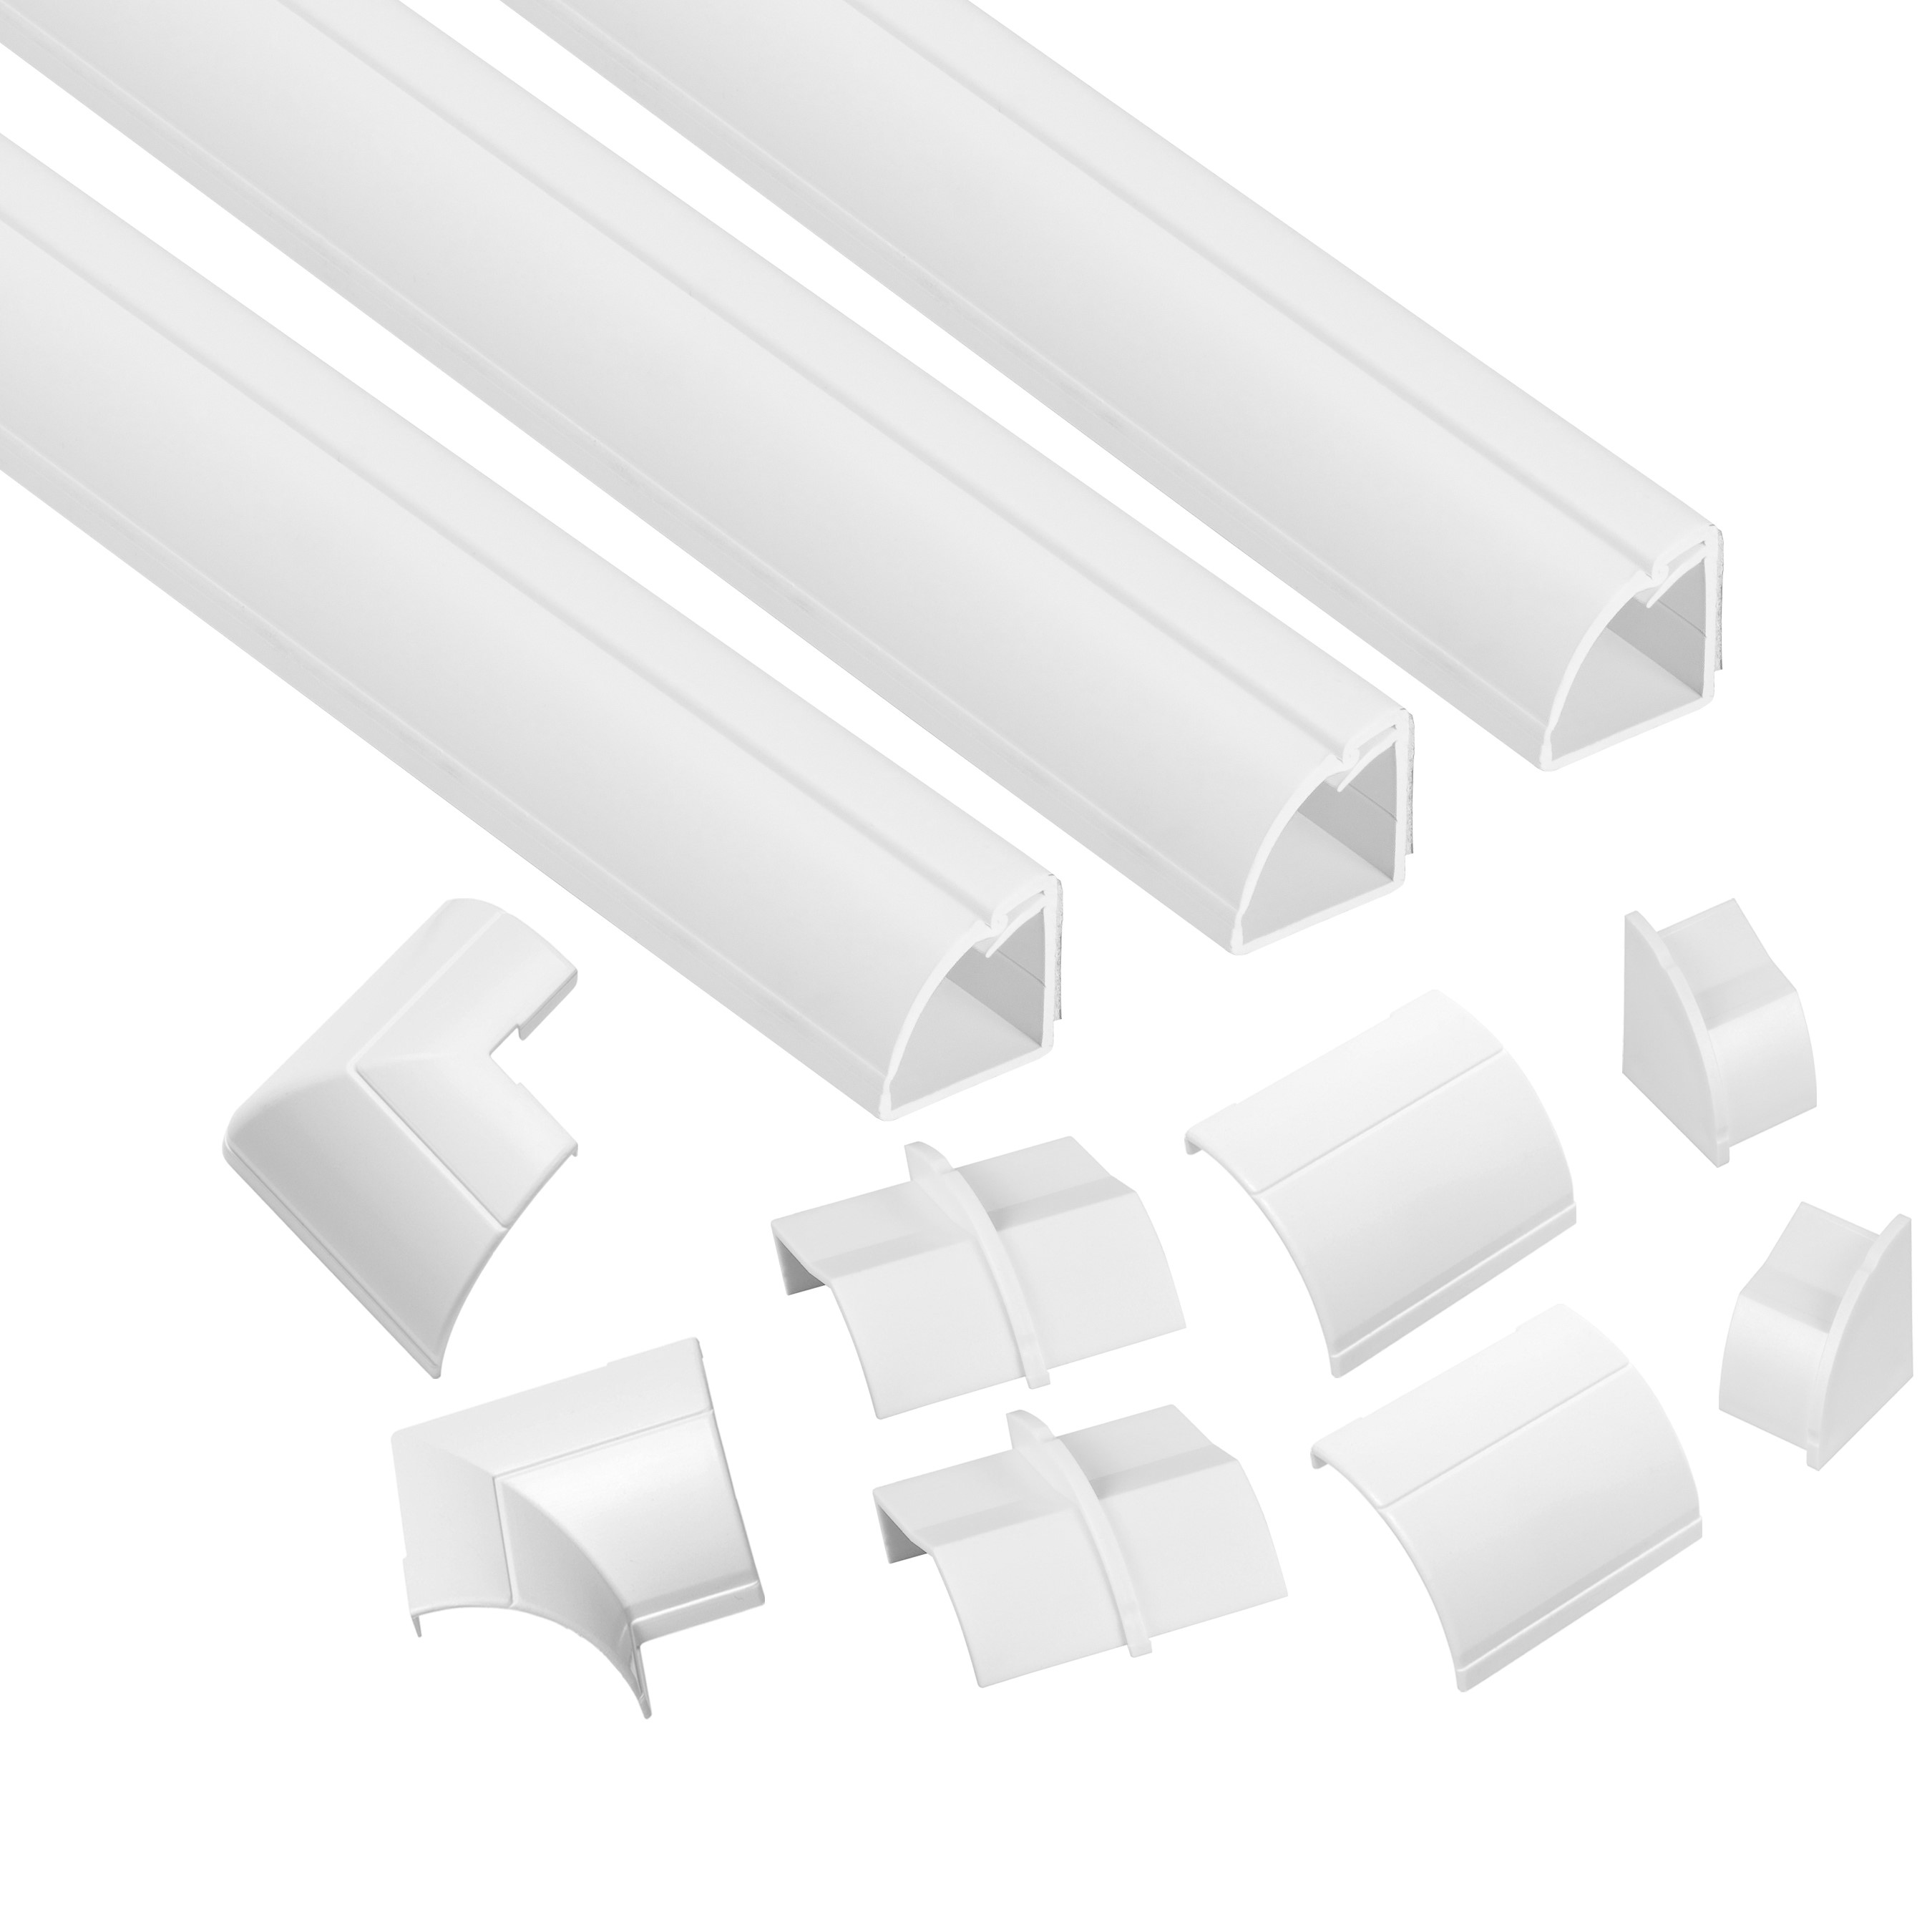 Goulottes 22x22mm 3x1m+ 2 A/S câbles+ 1 angle int+ext+2 coup+2 embou 